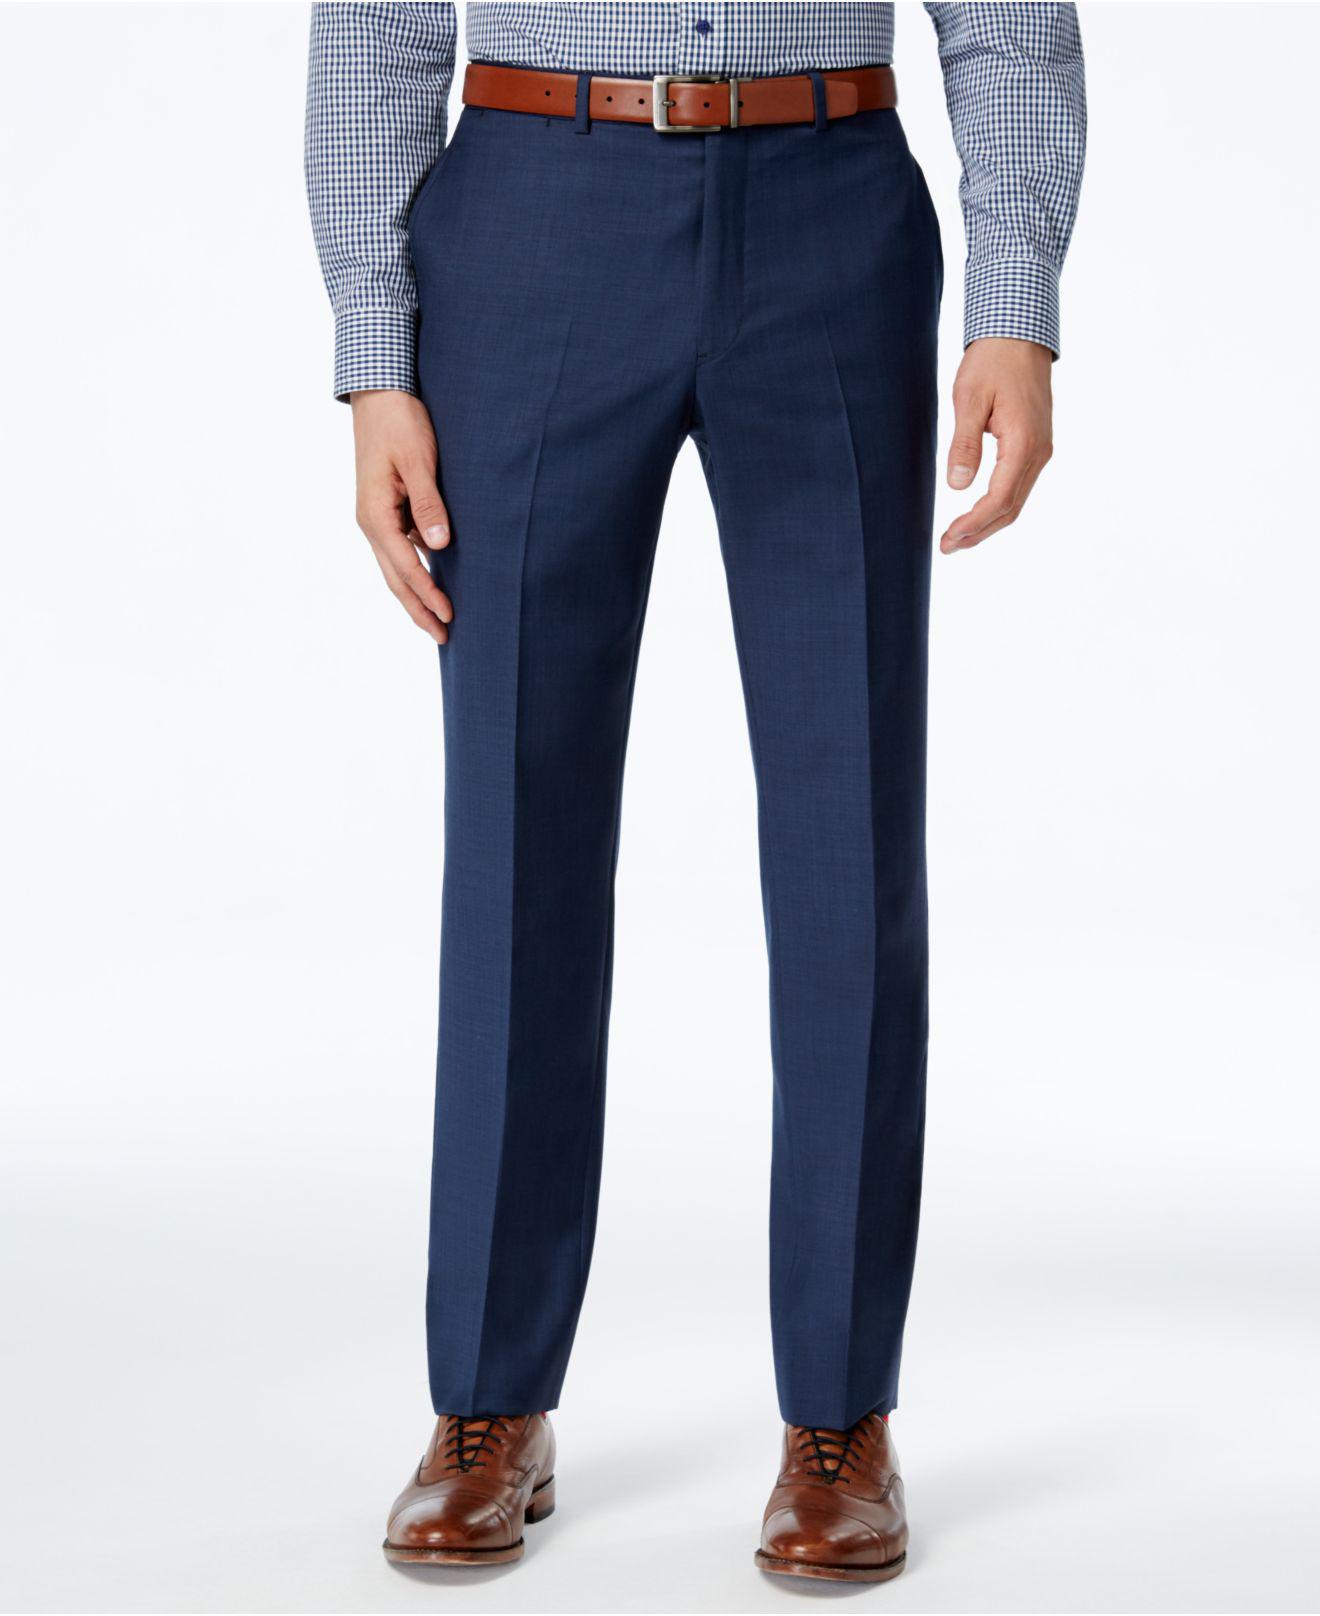 Lyst - Tommy Hilfiger Pants, Navy Sharkskin Classic Fit in Blue for Men